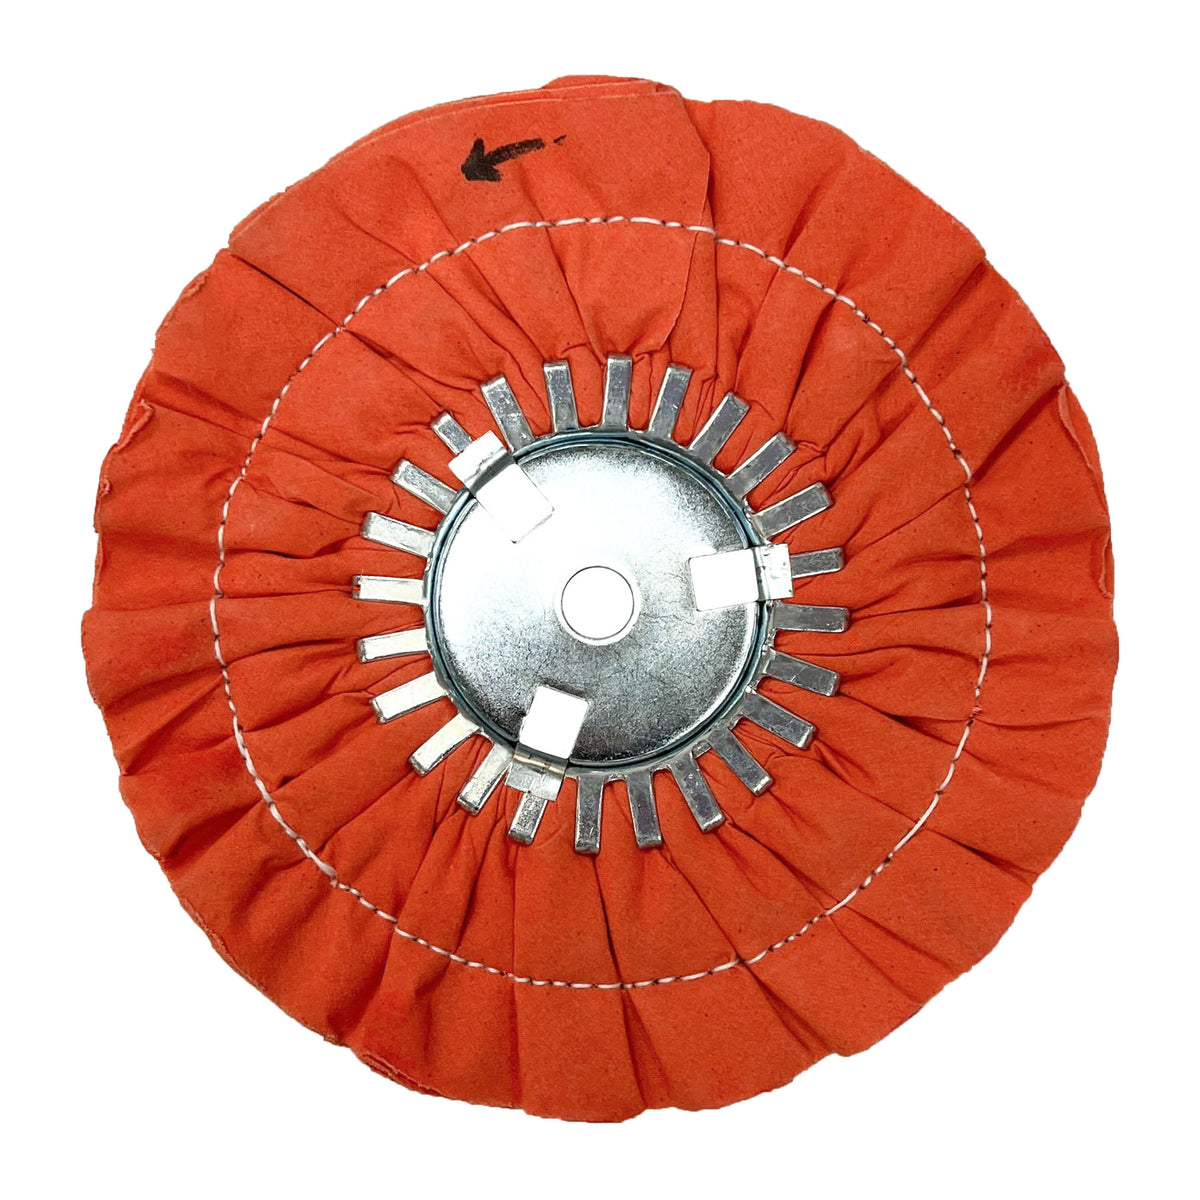 Renegade Products USA&#39;s orange 9&quot; stitched airway buffing wheels, perfect for achieving a high-quality finish with exceptional polishing capabilities, with center plate